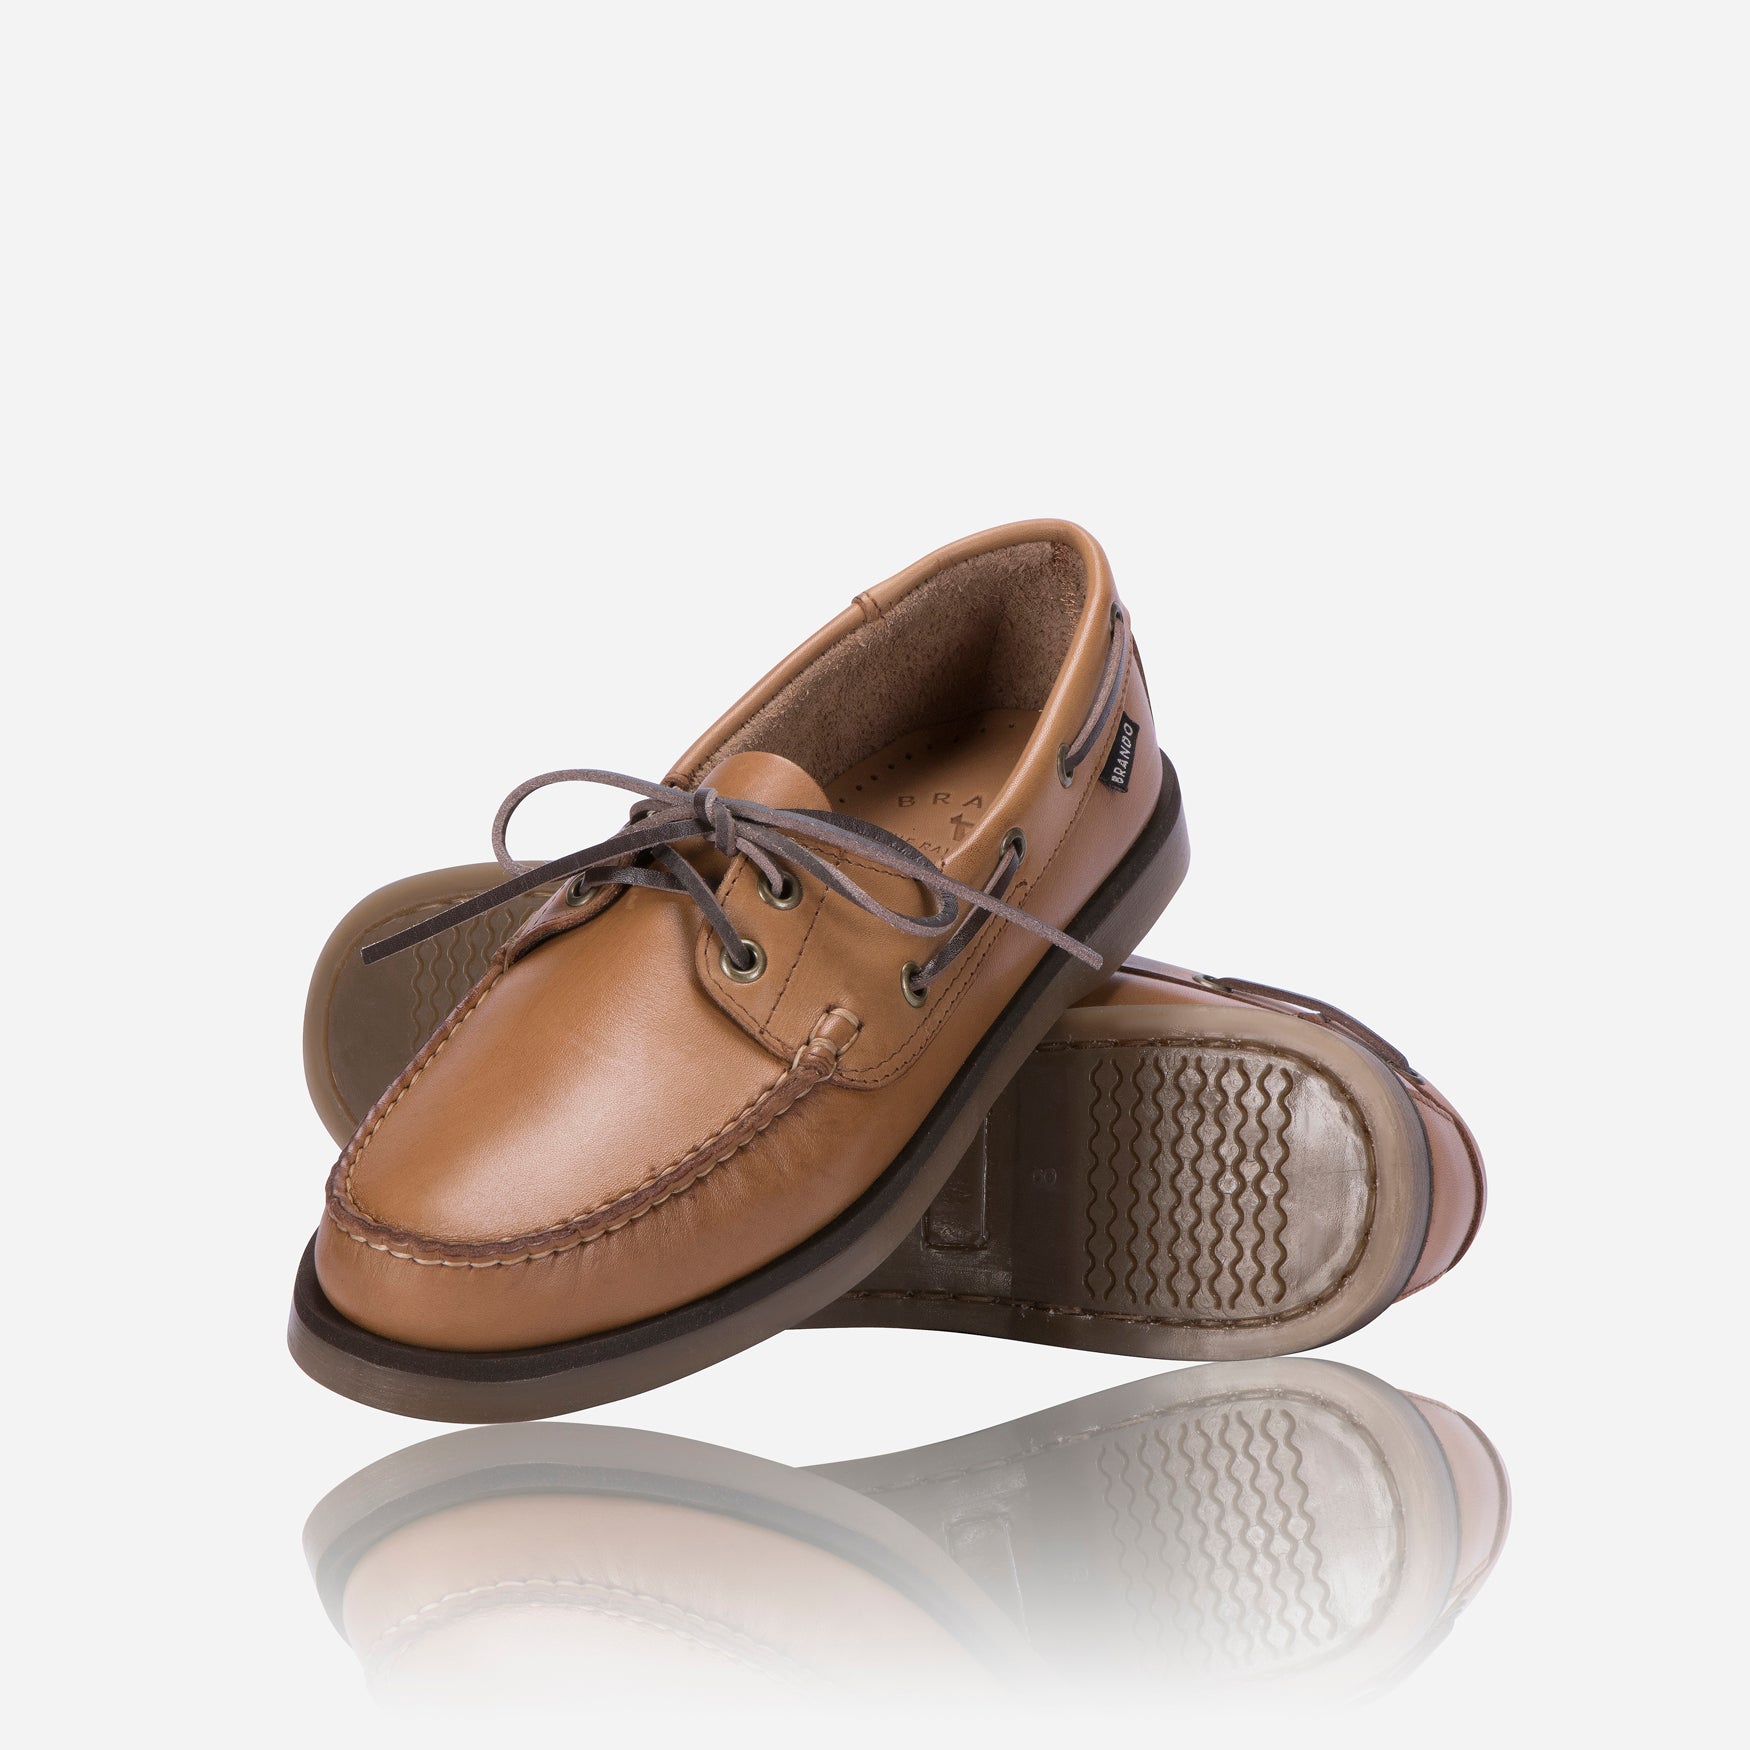 Doni-MS Boat shoe, Tan - Leather Shoes | Brando Leather South Africa